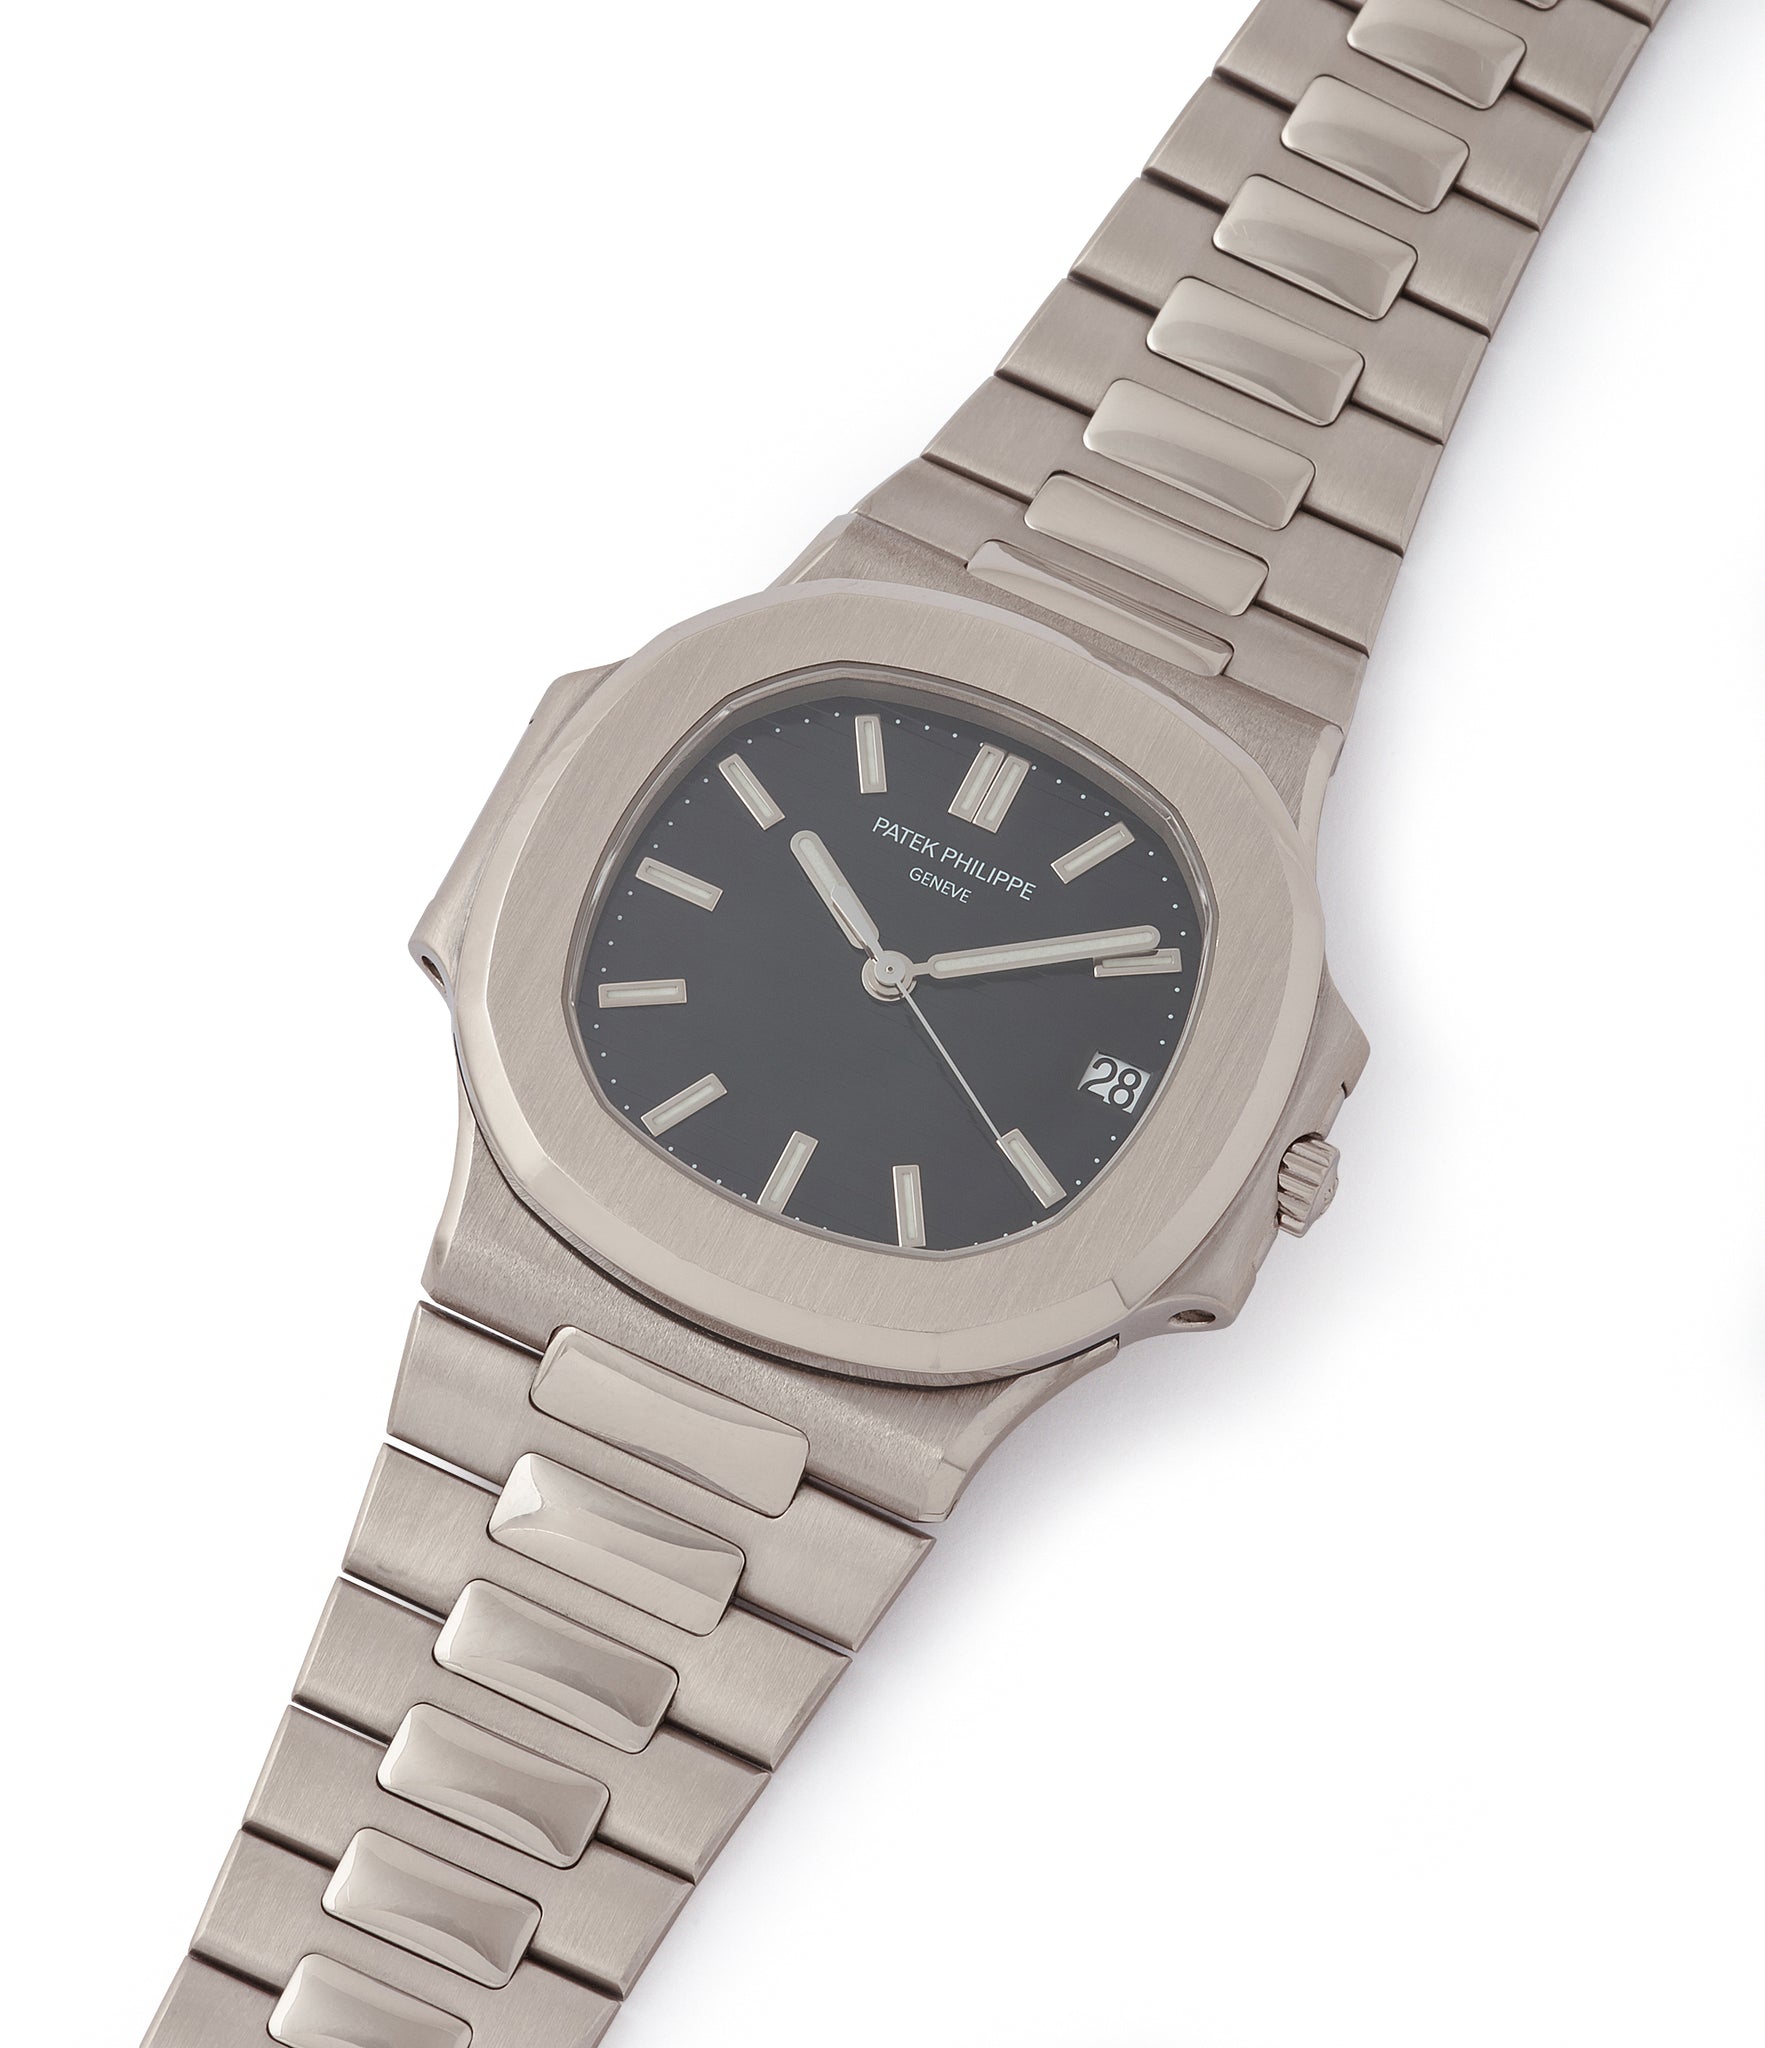 for sale Patek Philippe Nautilus 3711/1G-001 white gold pre-owned watch for sale online at A Collected Man London UK specialist of rare watches